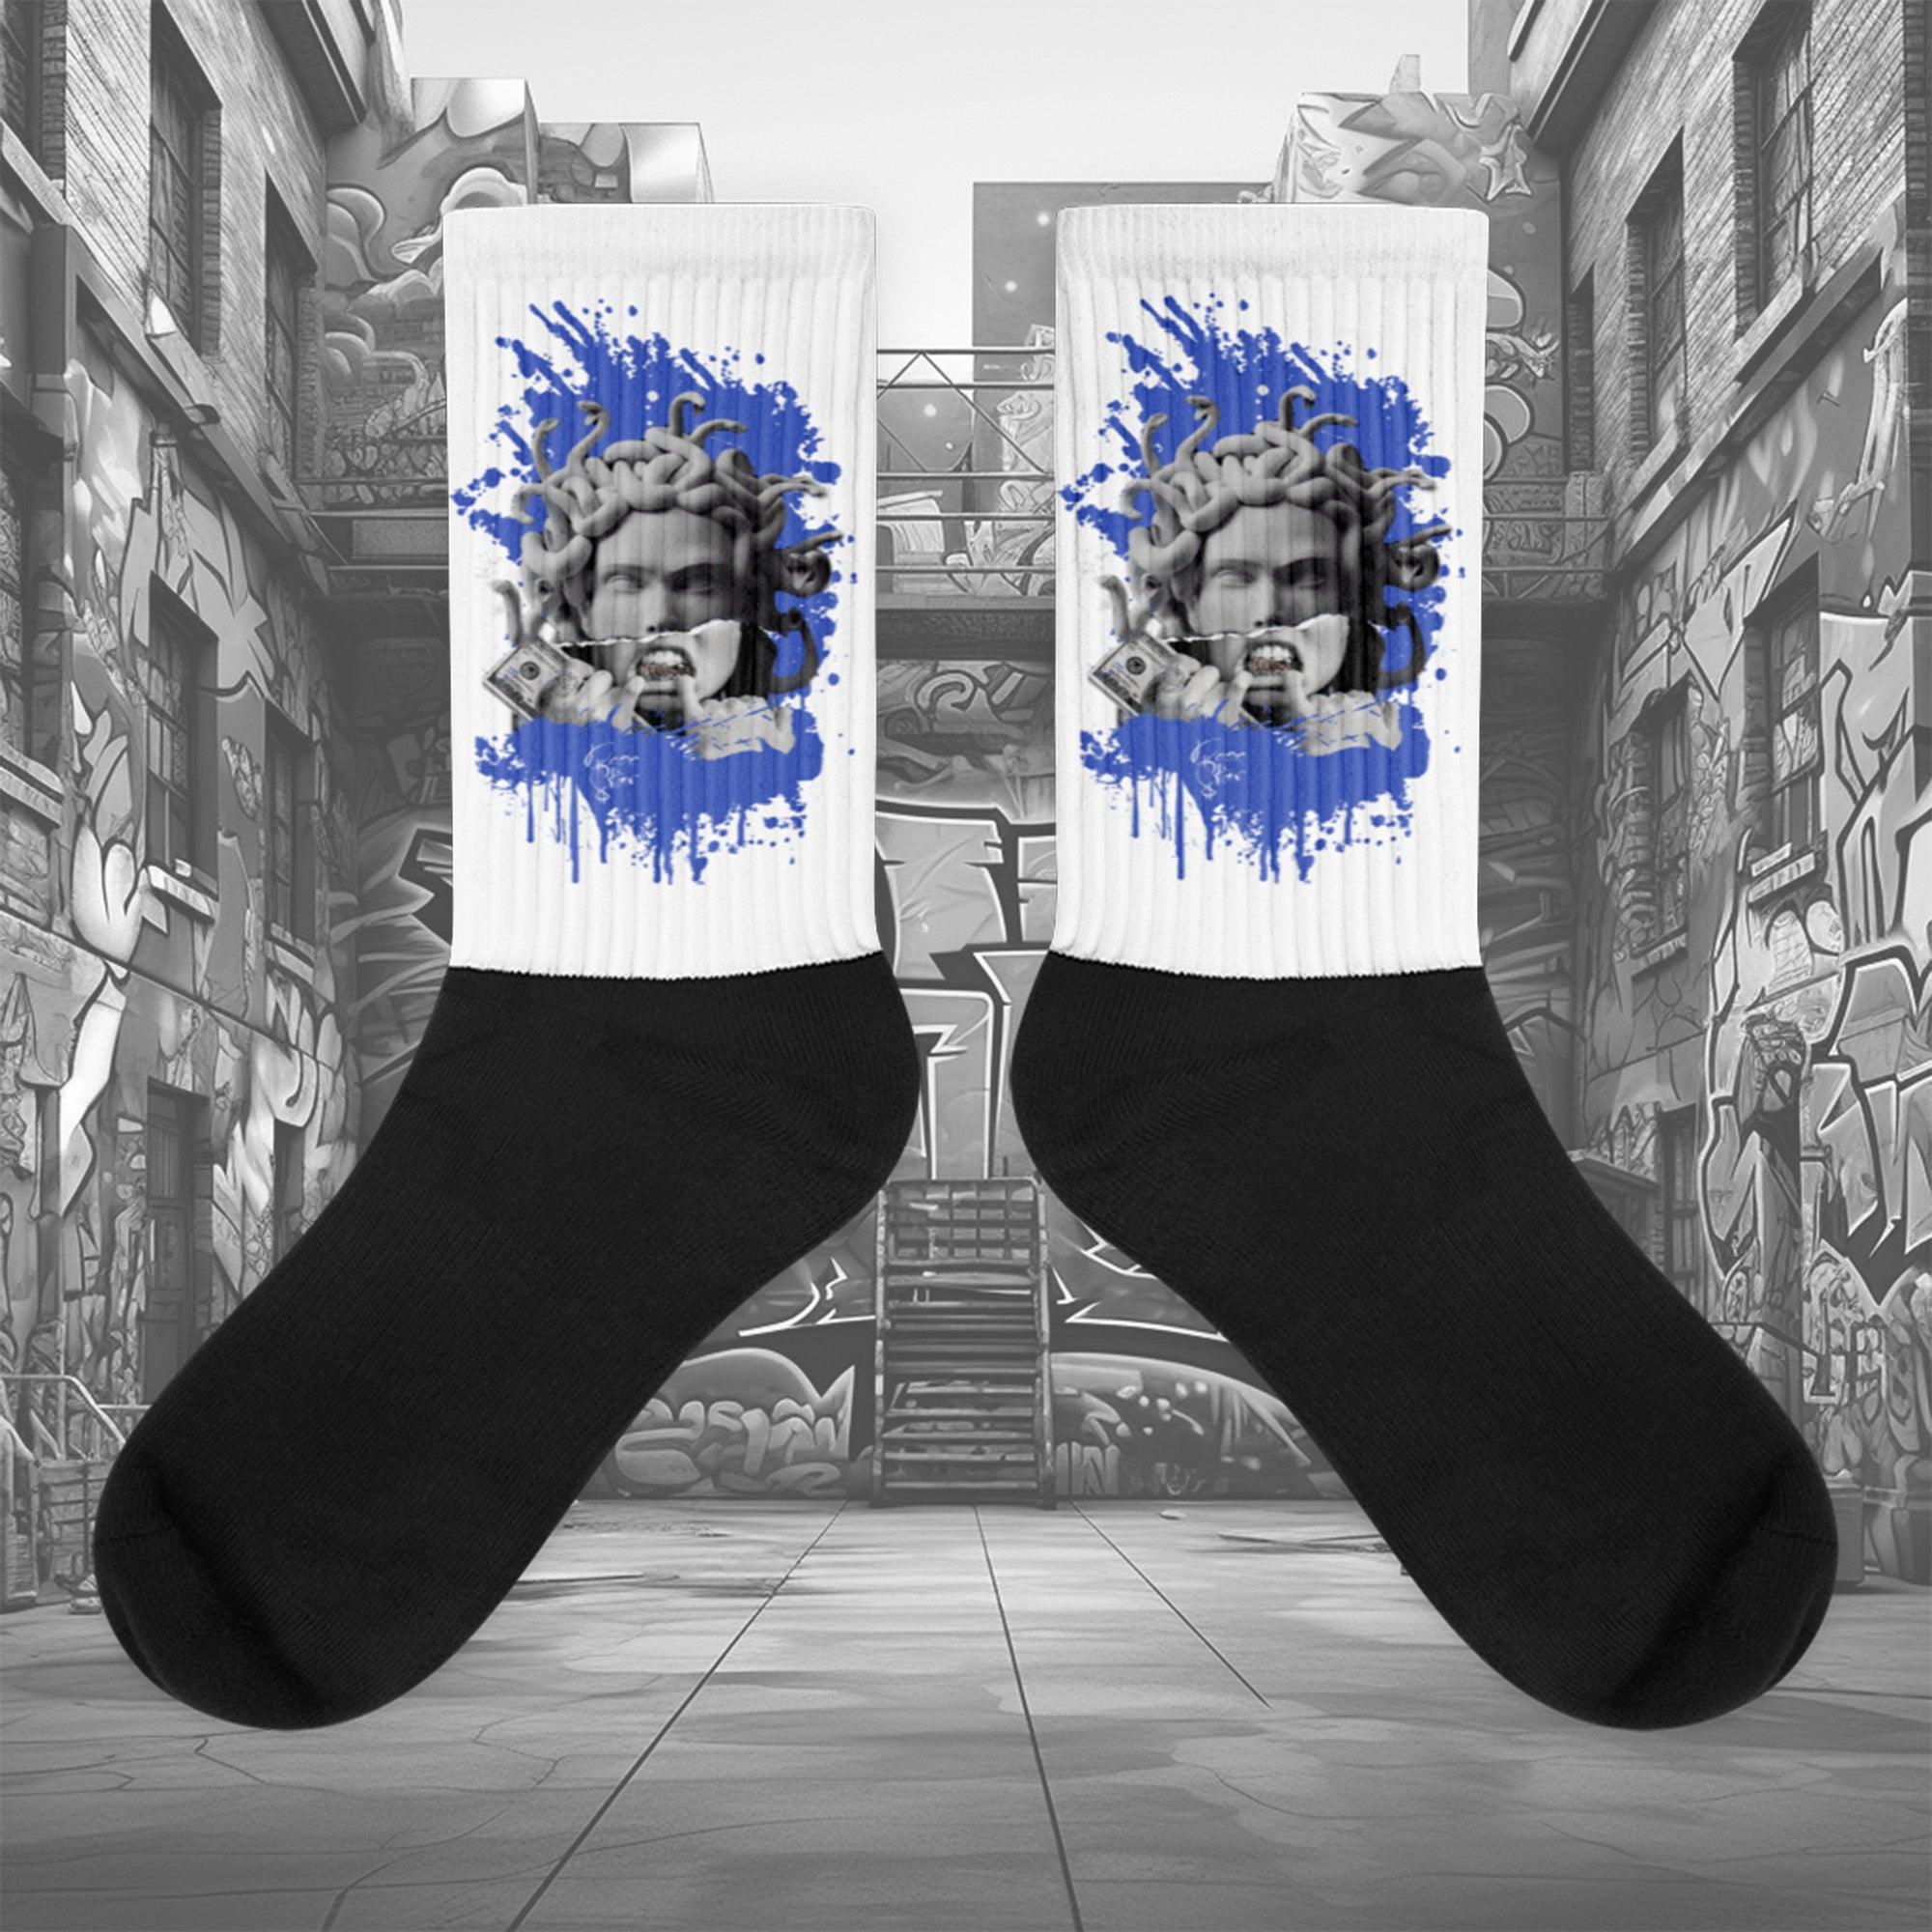 Showcases the view of the socks, highlighting the vibrant ' MEDUSA ' design, which perfectly complements the Nike Dunk Disrupt 2 Hyper Royal sneakers. The intricate pattern and color scheme inspired by the  theme are prominently displayed.  Focusing on the ribbed leg , cusioned bottoms and the snug fit of the socks. This angle provides a clear view of the texture and quality of the material blend.